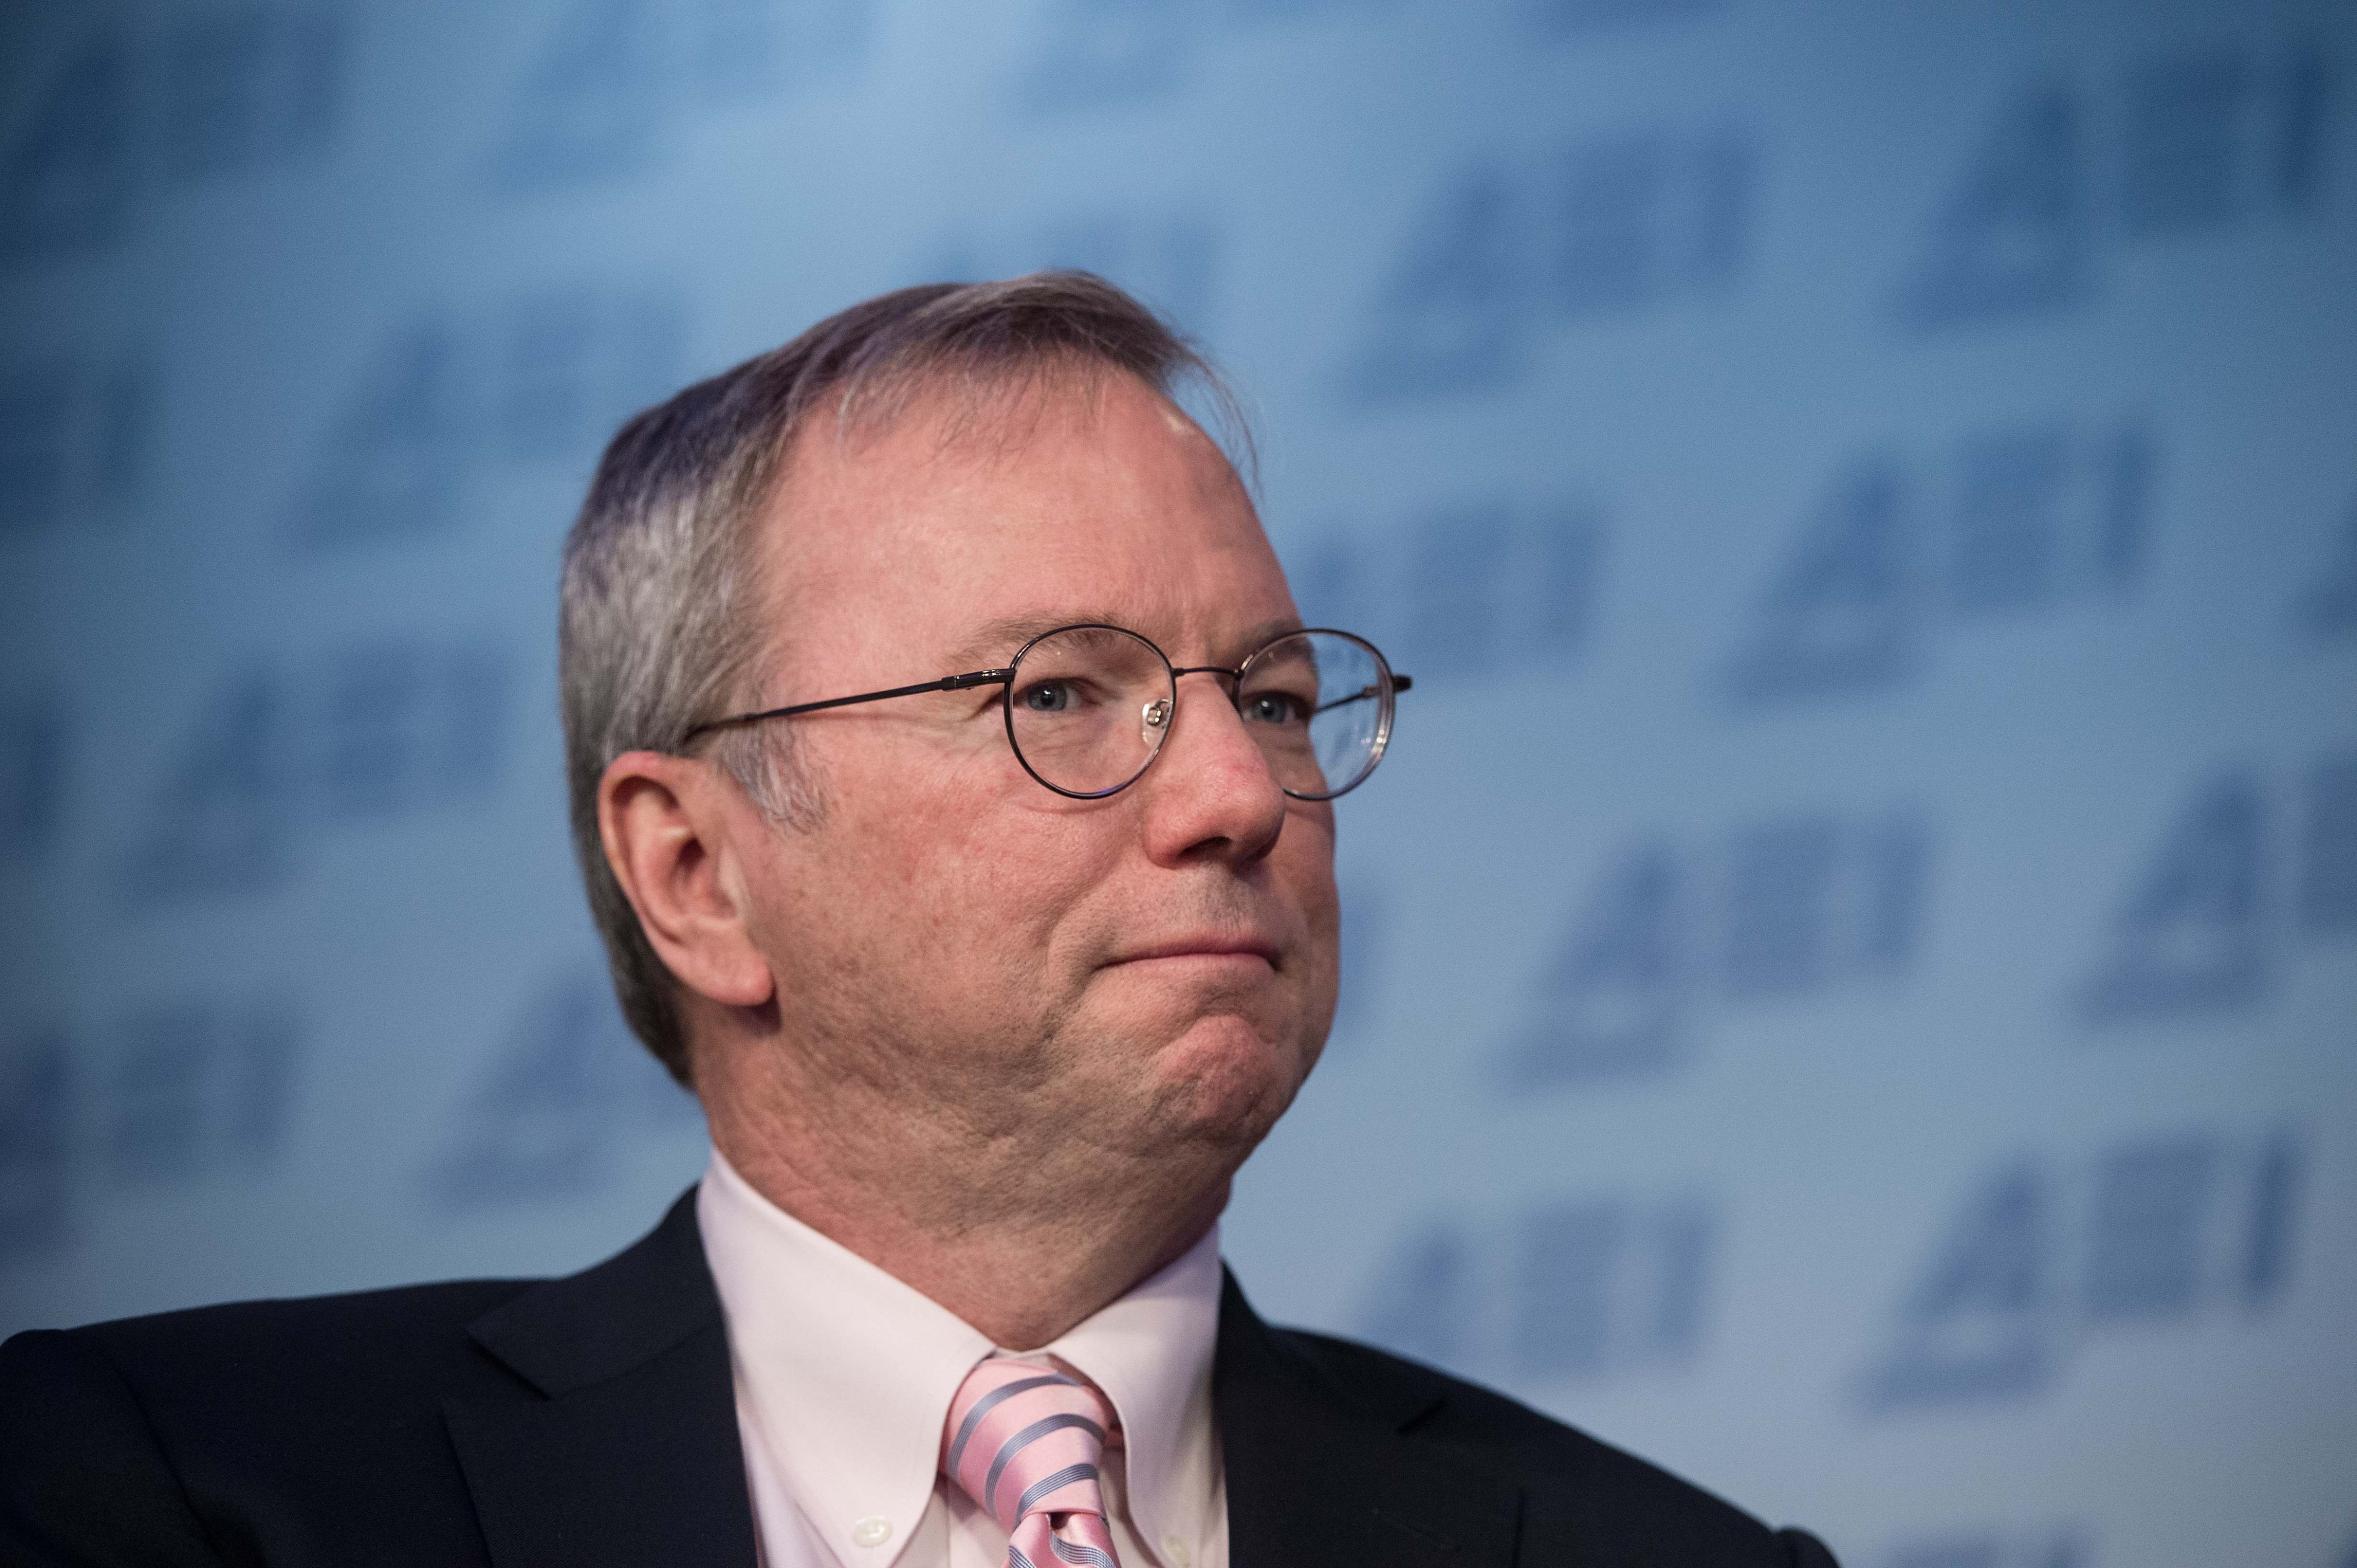 Google executive chairman Eric Schmidt speaks on technology on March 18, 2015 at the American Enterprise Institute in Washington, DC. (Nicholas Kamm—AFP/Getty Images)